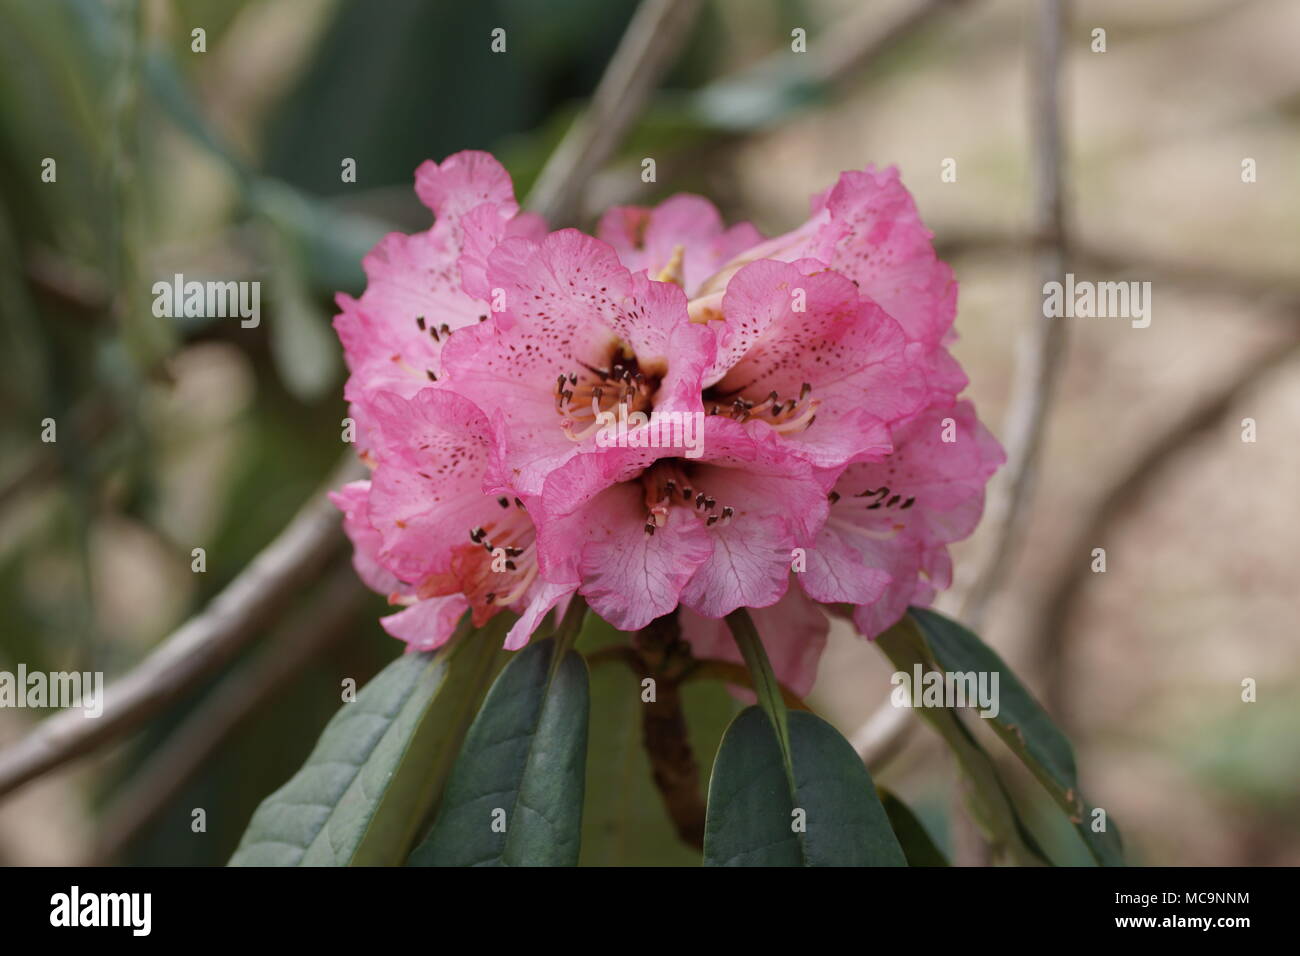 Flowers of  Rhododendron arboreum at Clyne gardens, Swansea, Wales, UK. Stock Photo